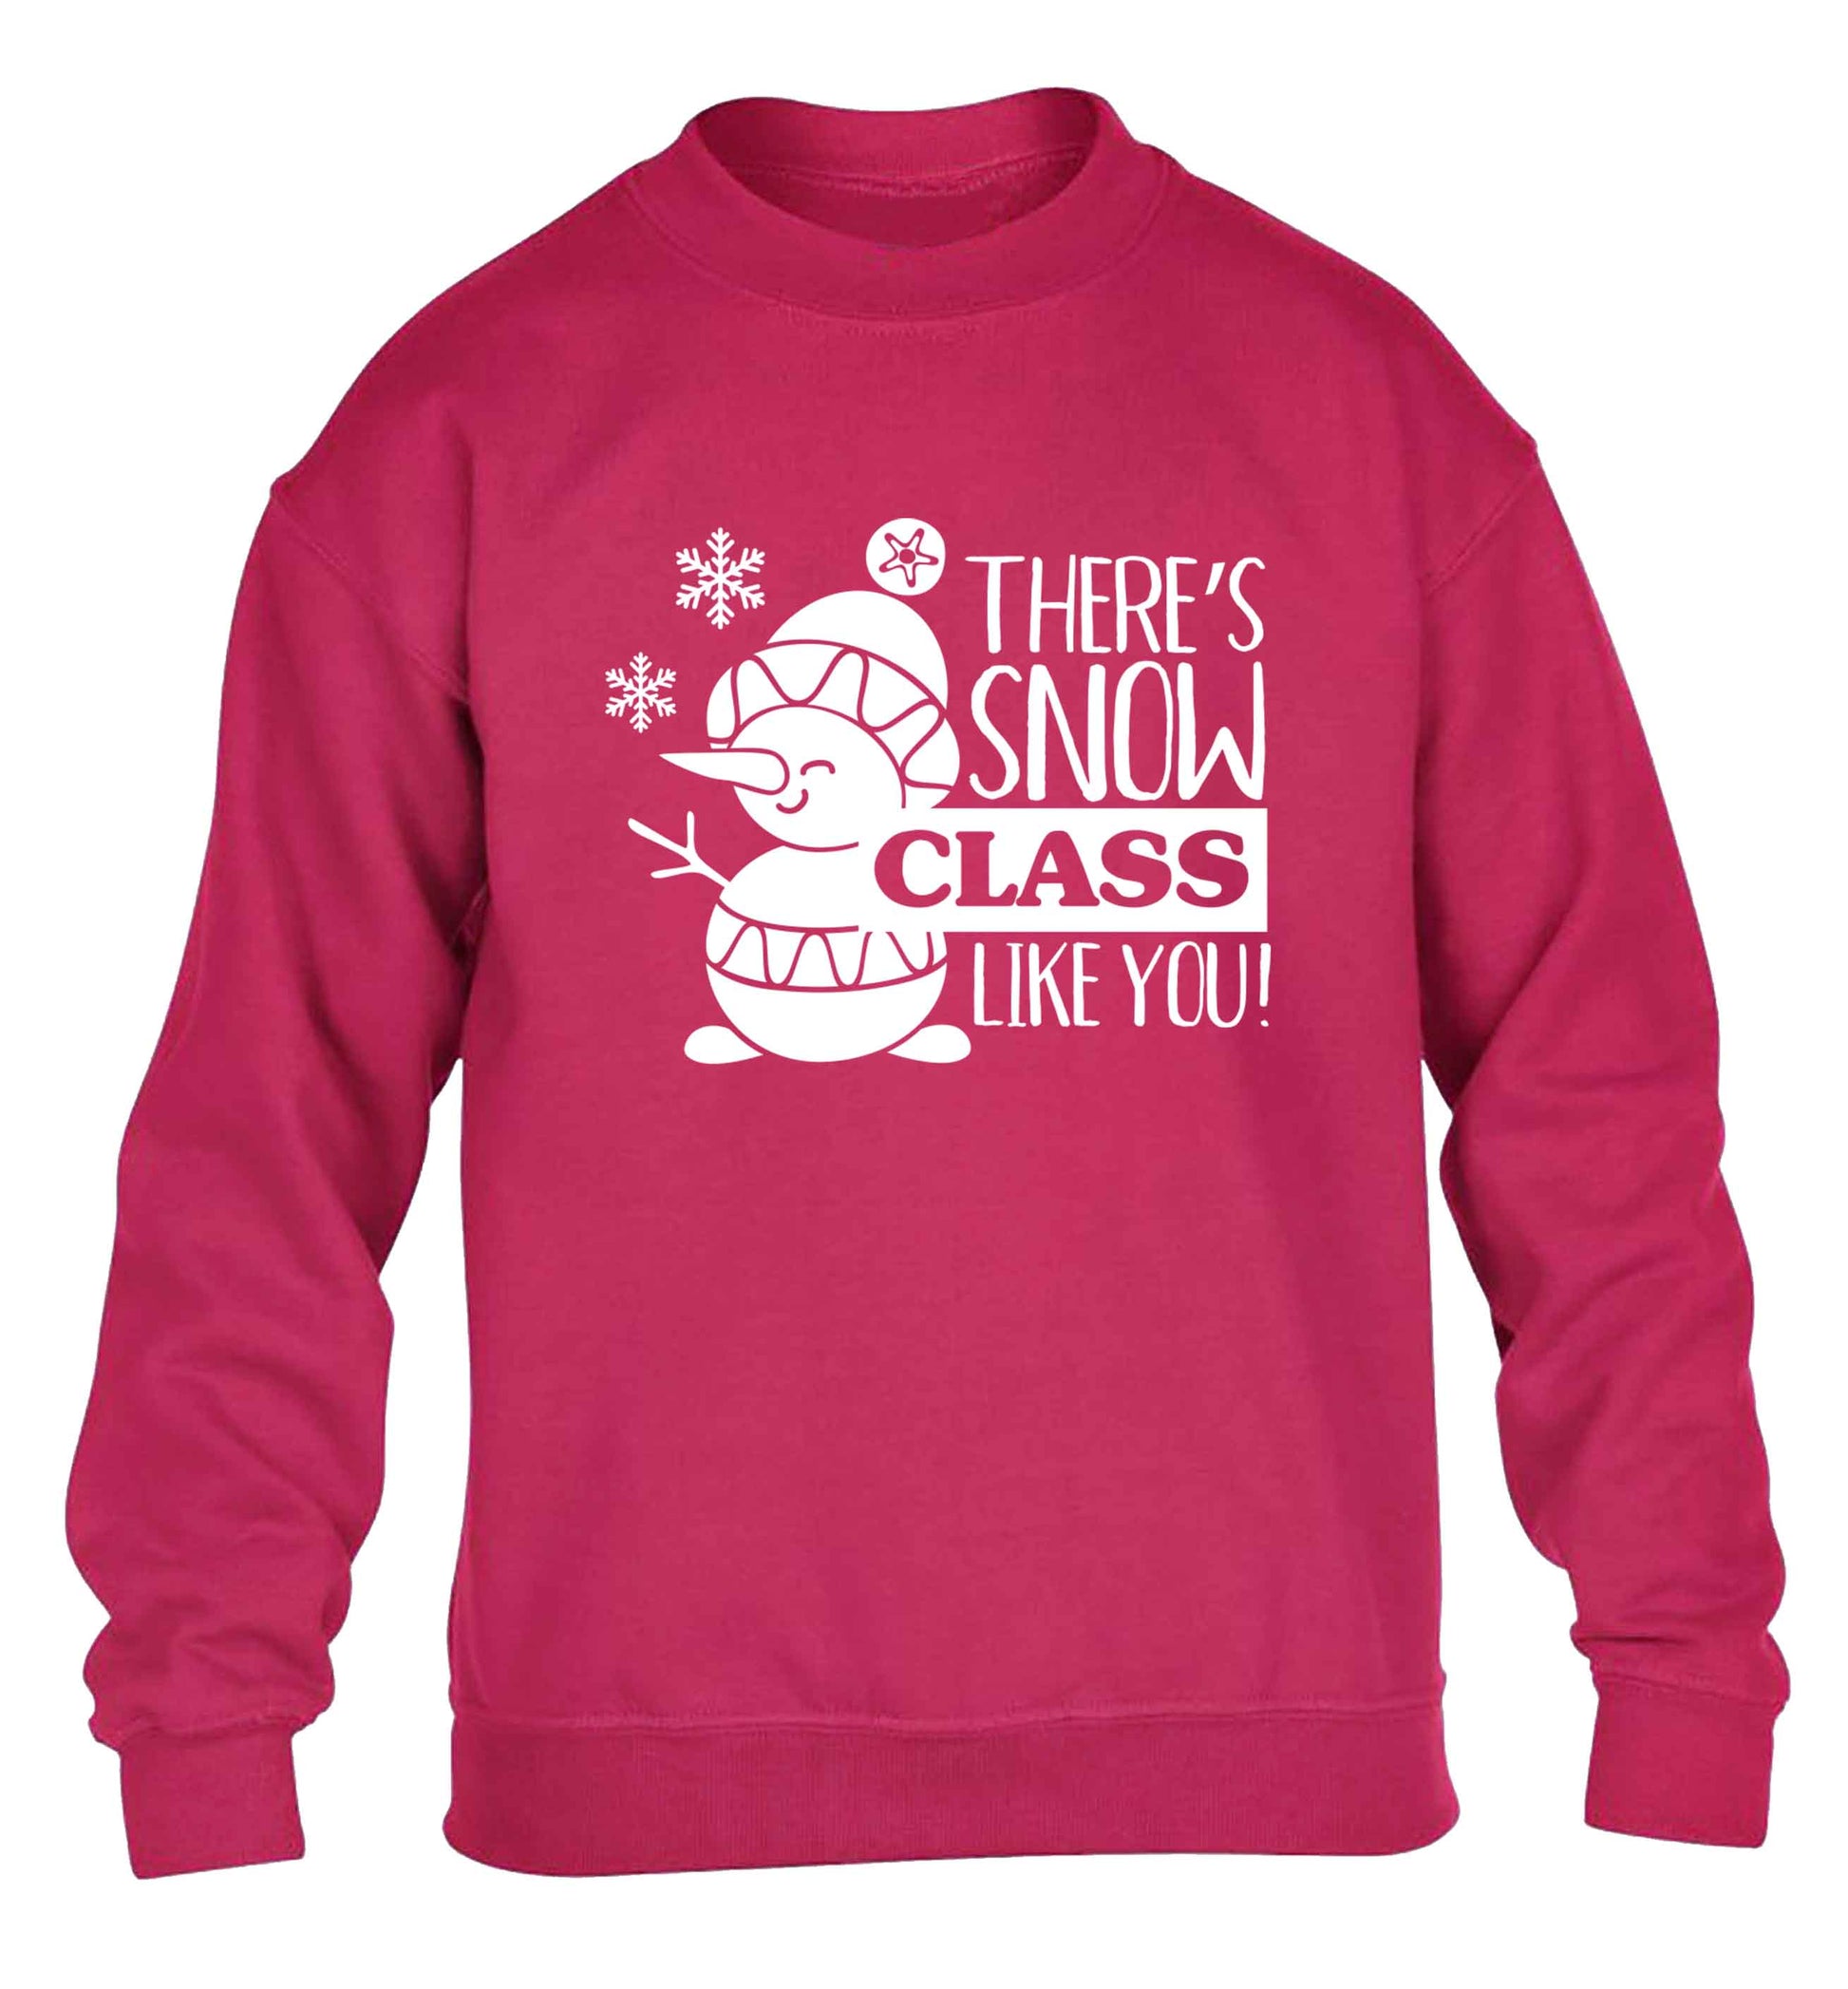 There's snow class like you children's pink sweater 12-13 Years